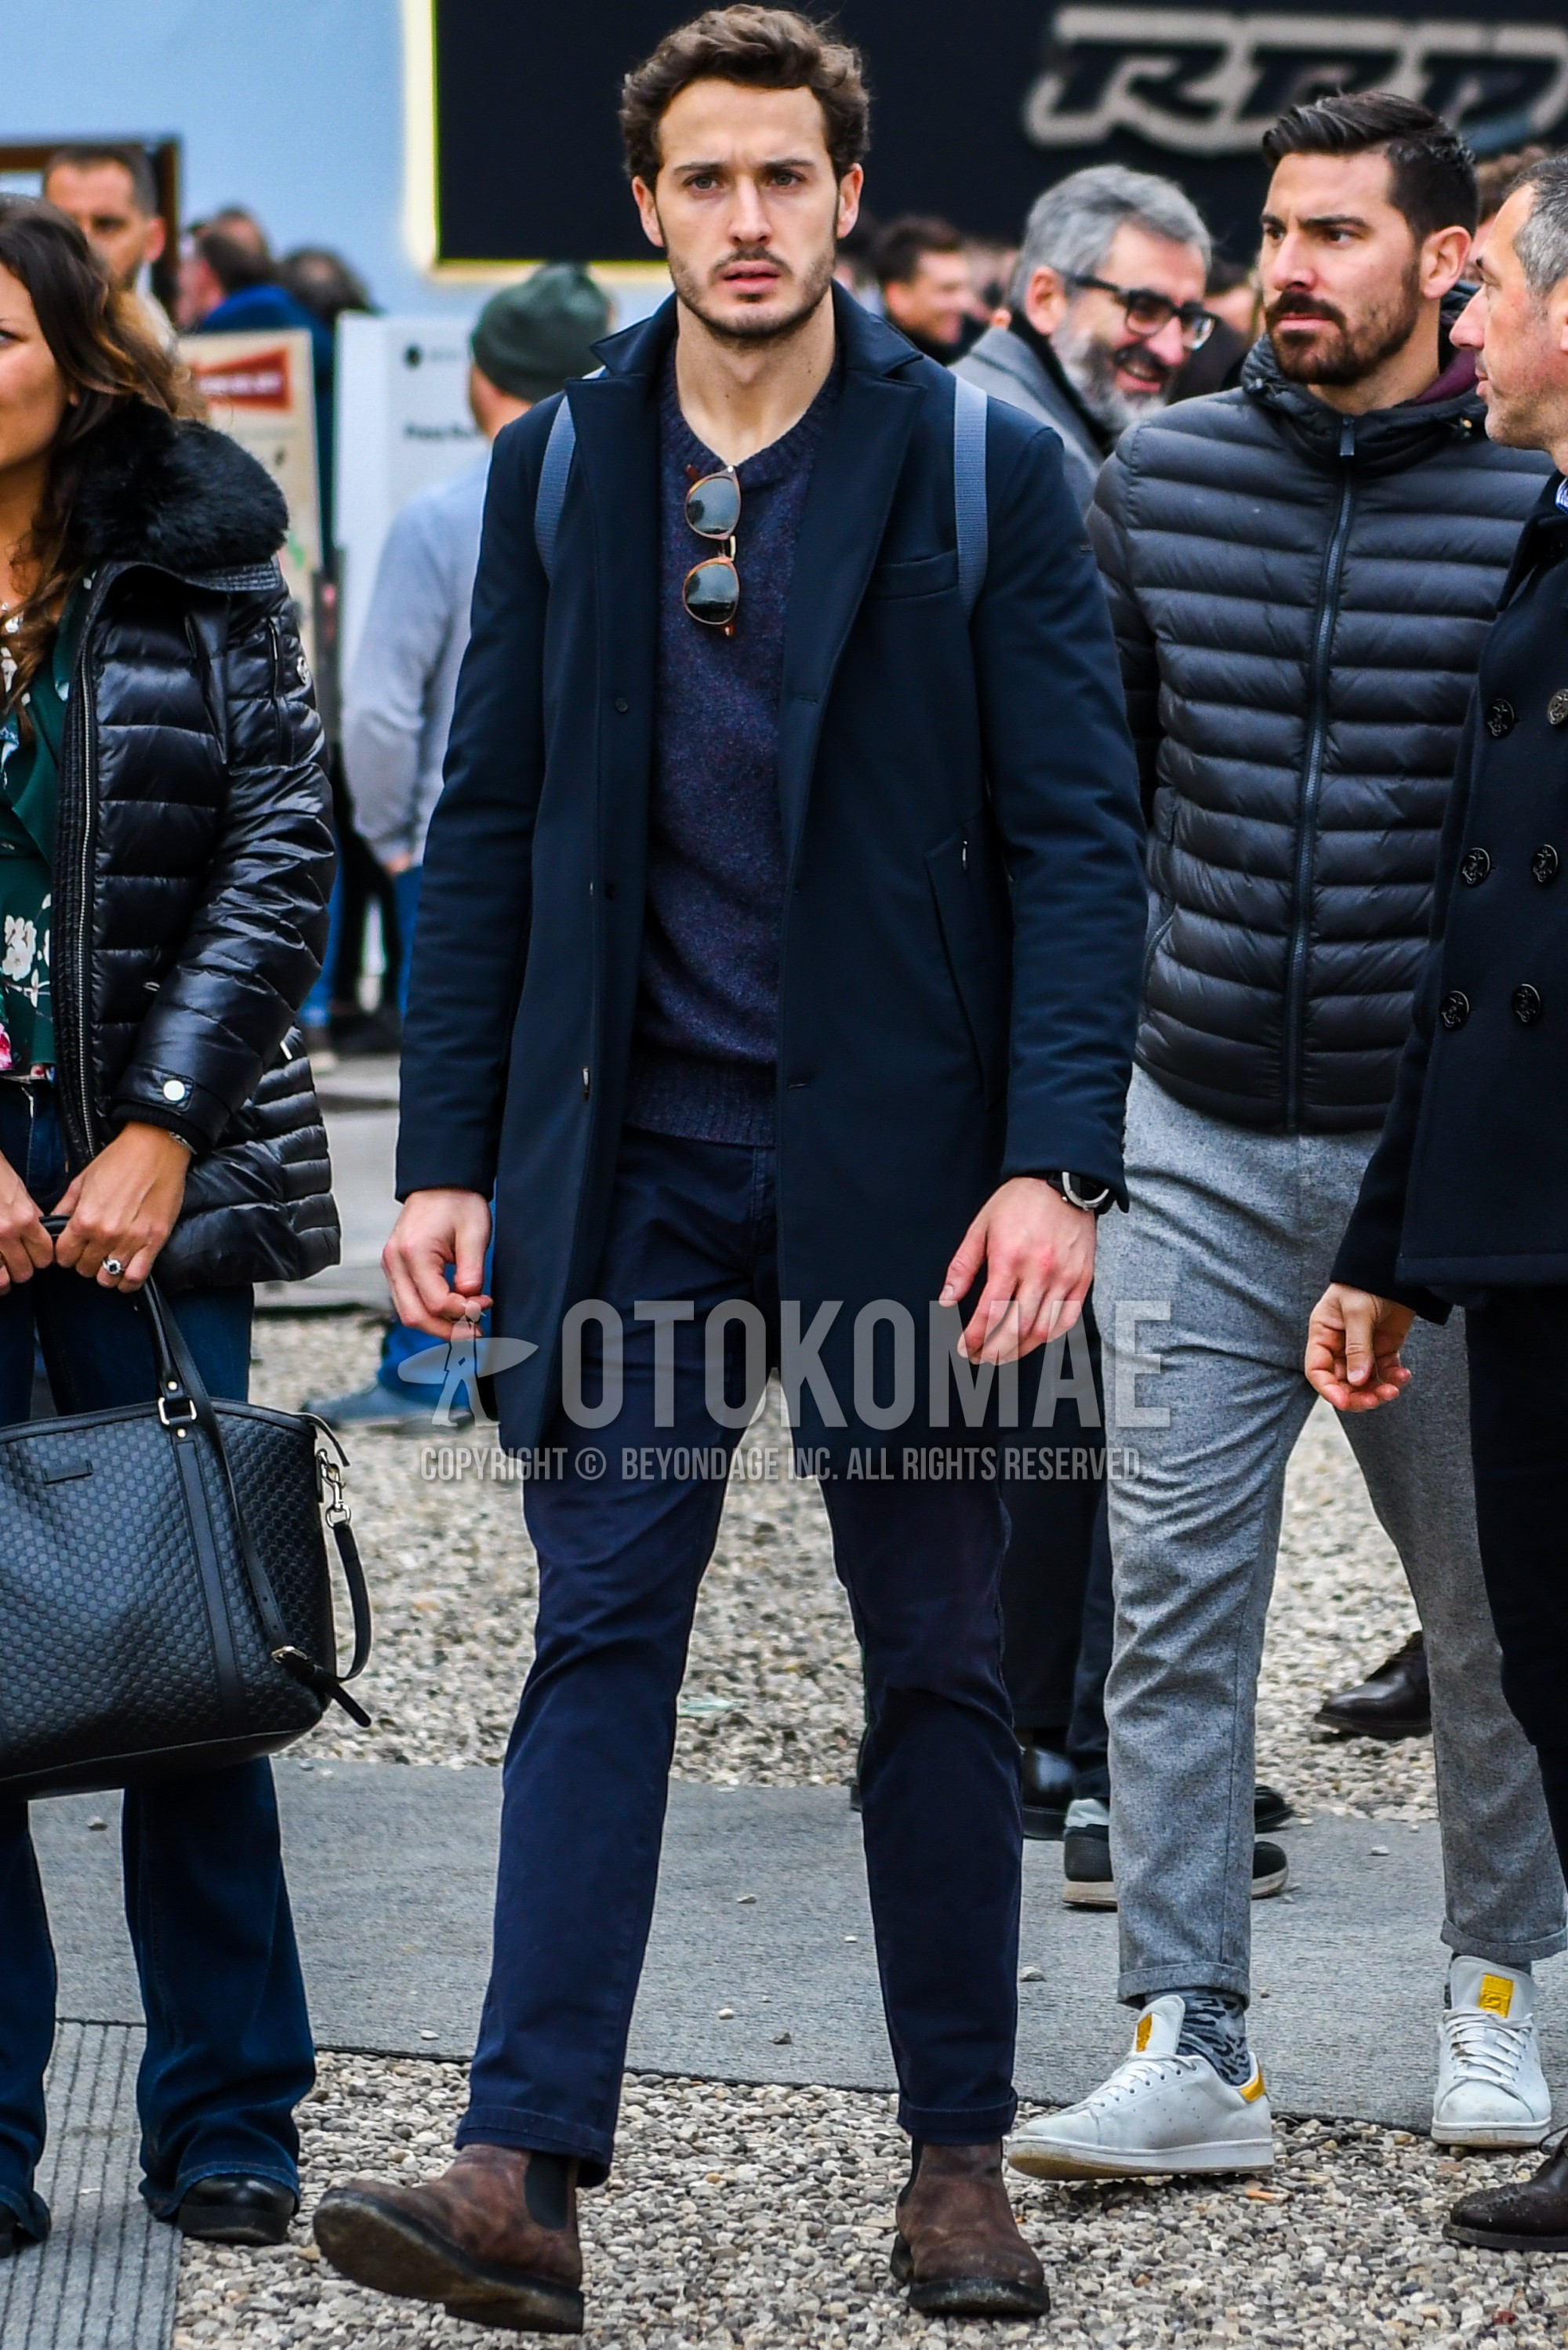 Men's autumn winter outfit with navy plain chester coat, gray plain sweater, navy plain chinos, brown side-gore boots.